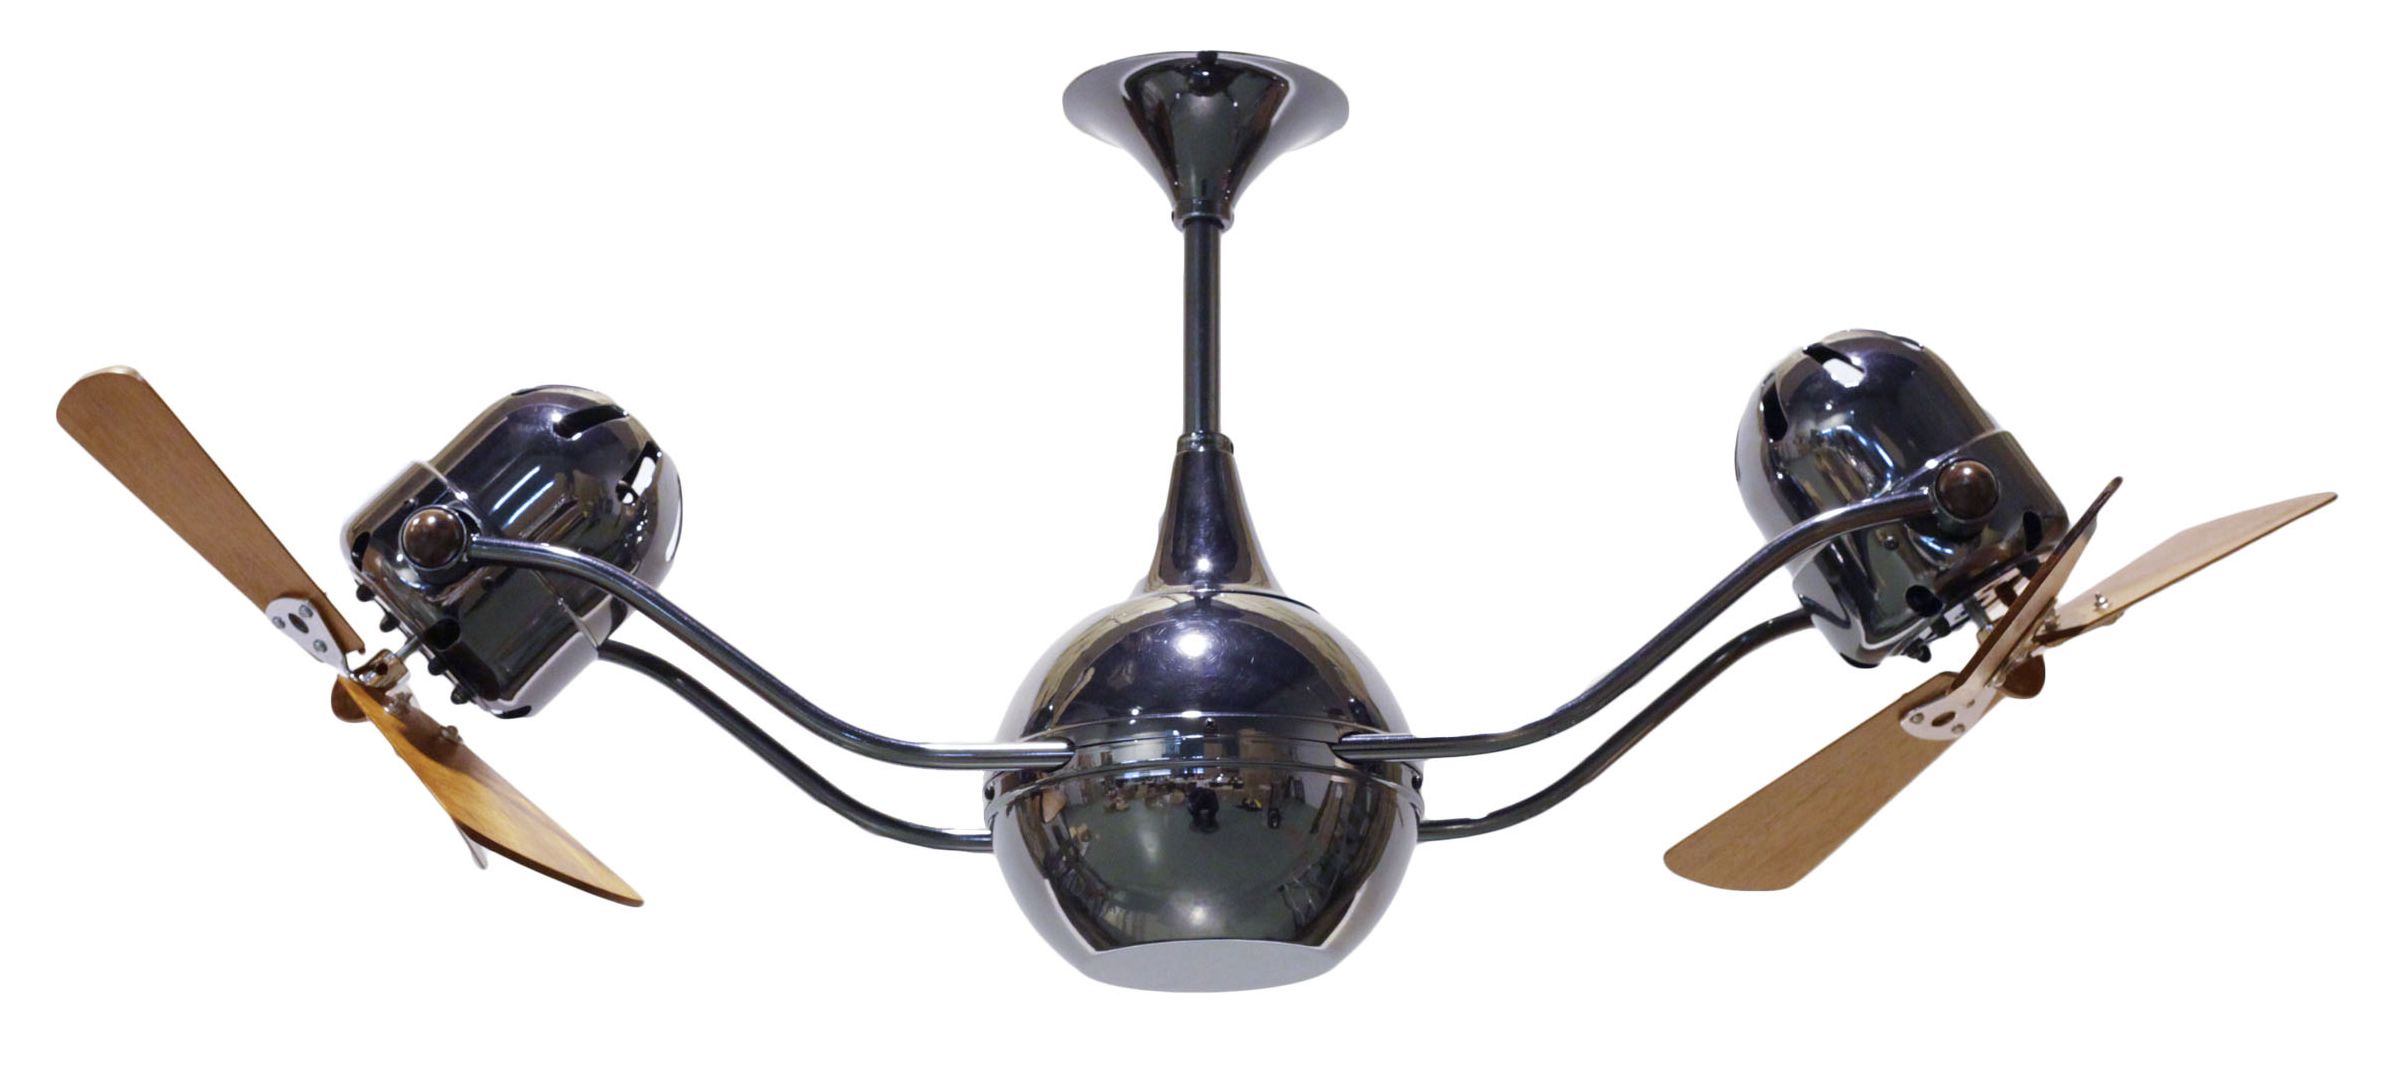 Vent-Bettina rotational dual head ceiling fan in Black Nickel finish with Mahogany wood blades made by Matthews Fan Company.